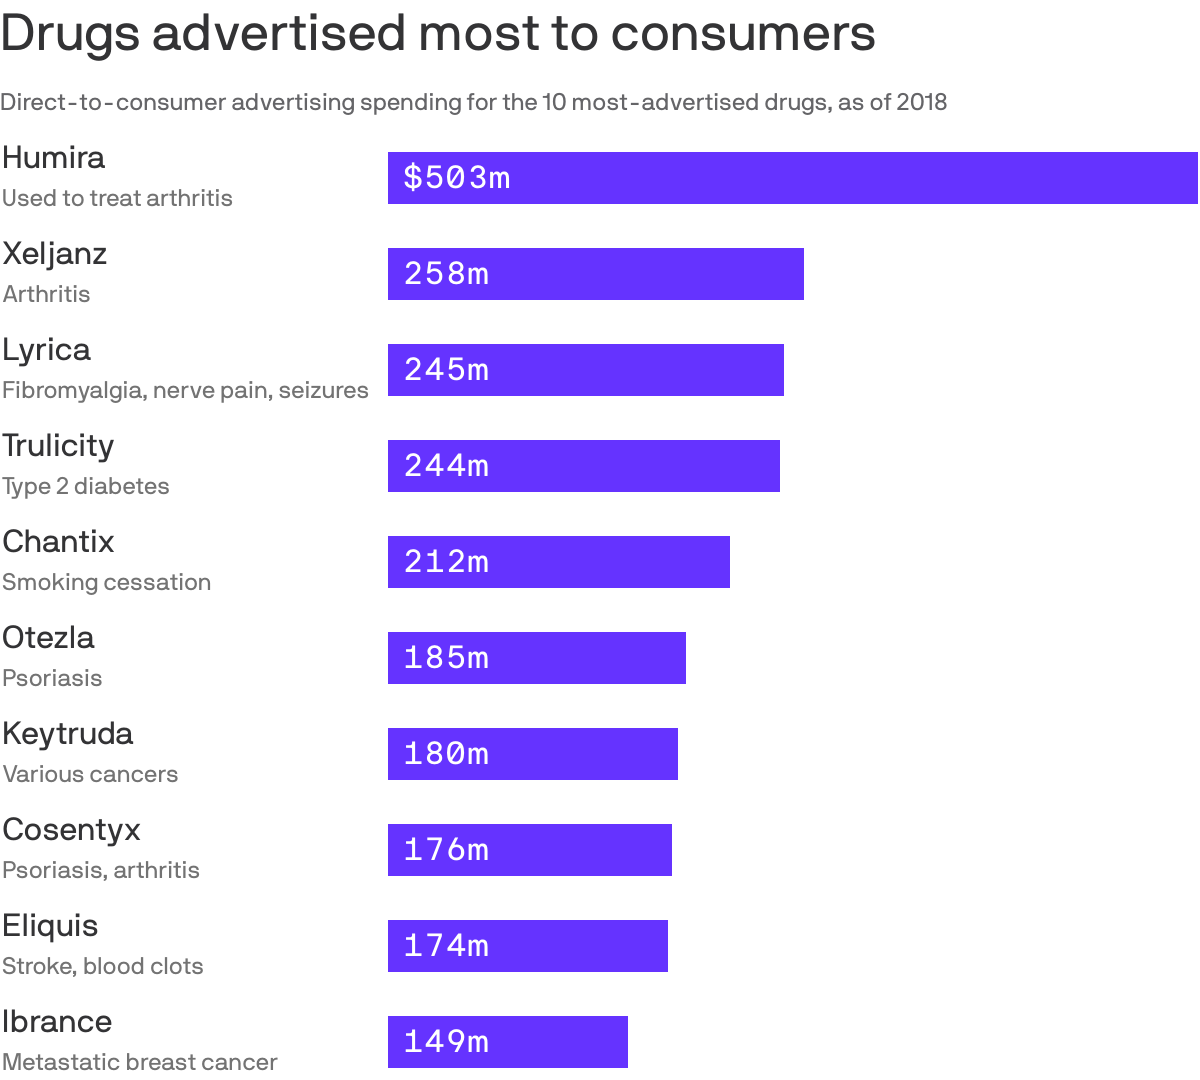 Drugs advertised most to consumers 